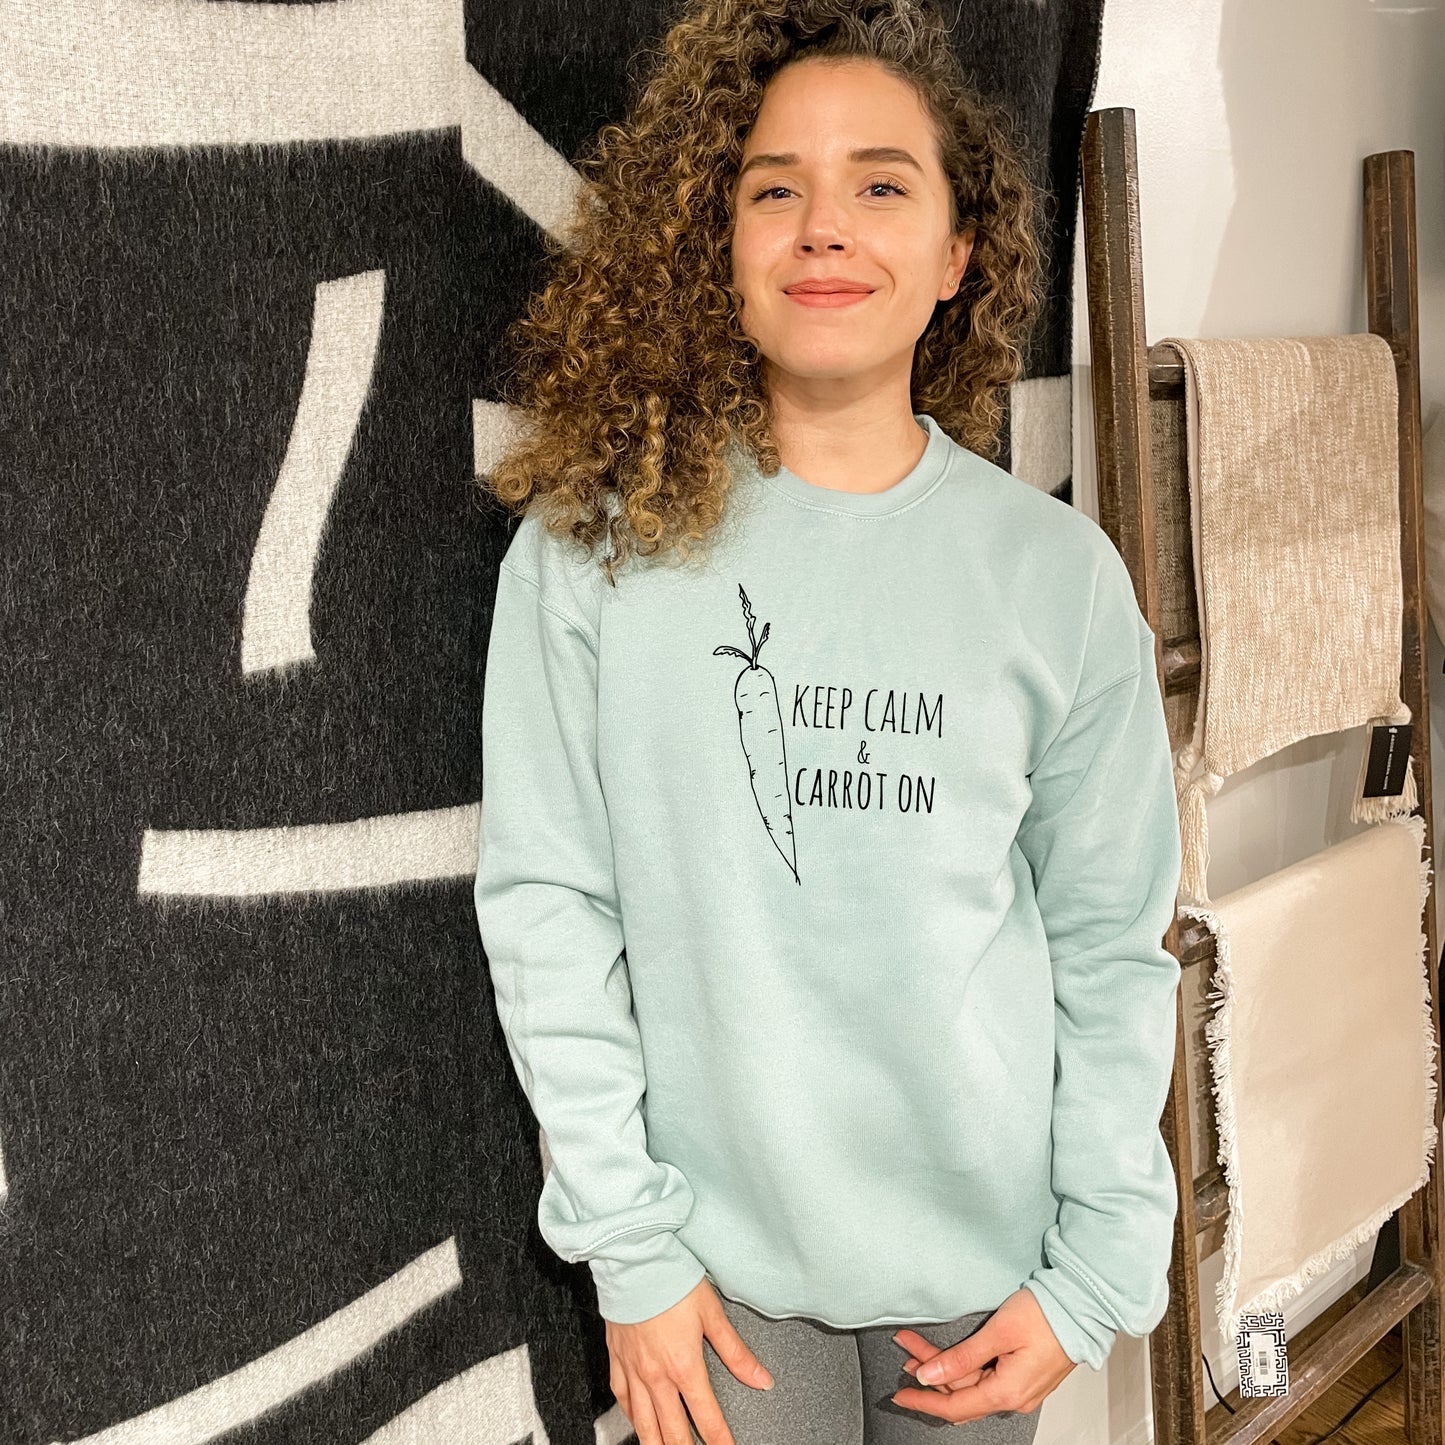 Keep Calm and Carrot On - Unisex Sweatshirt - Heather Gray or Dusty Blue